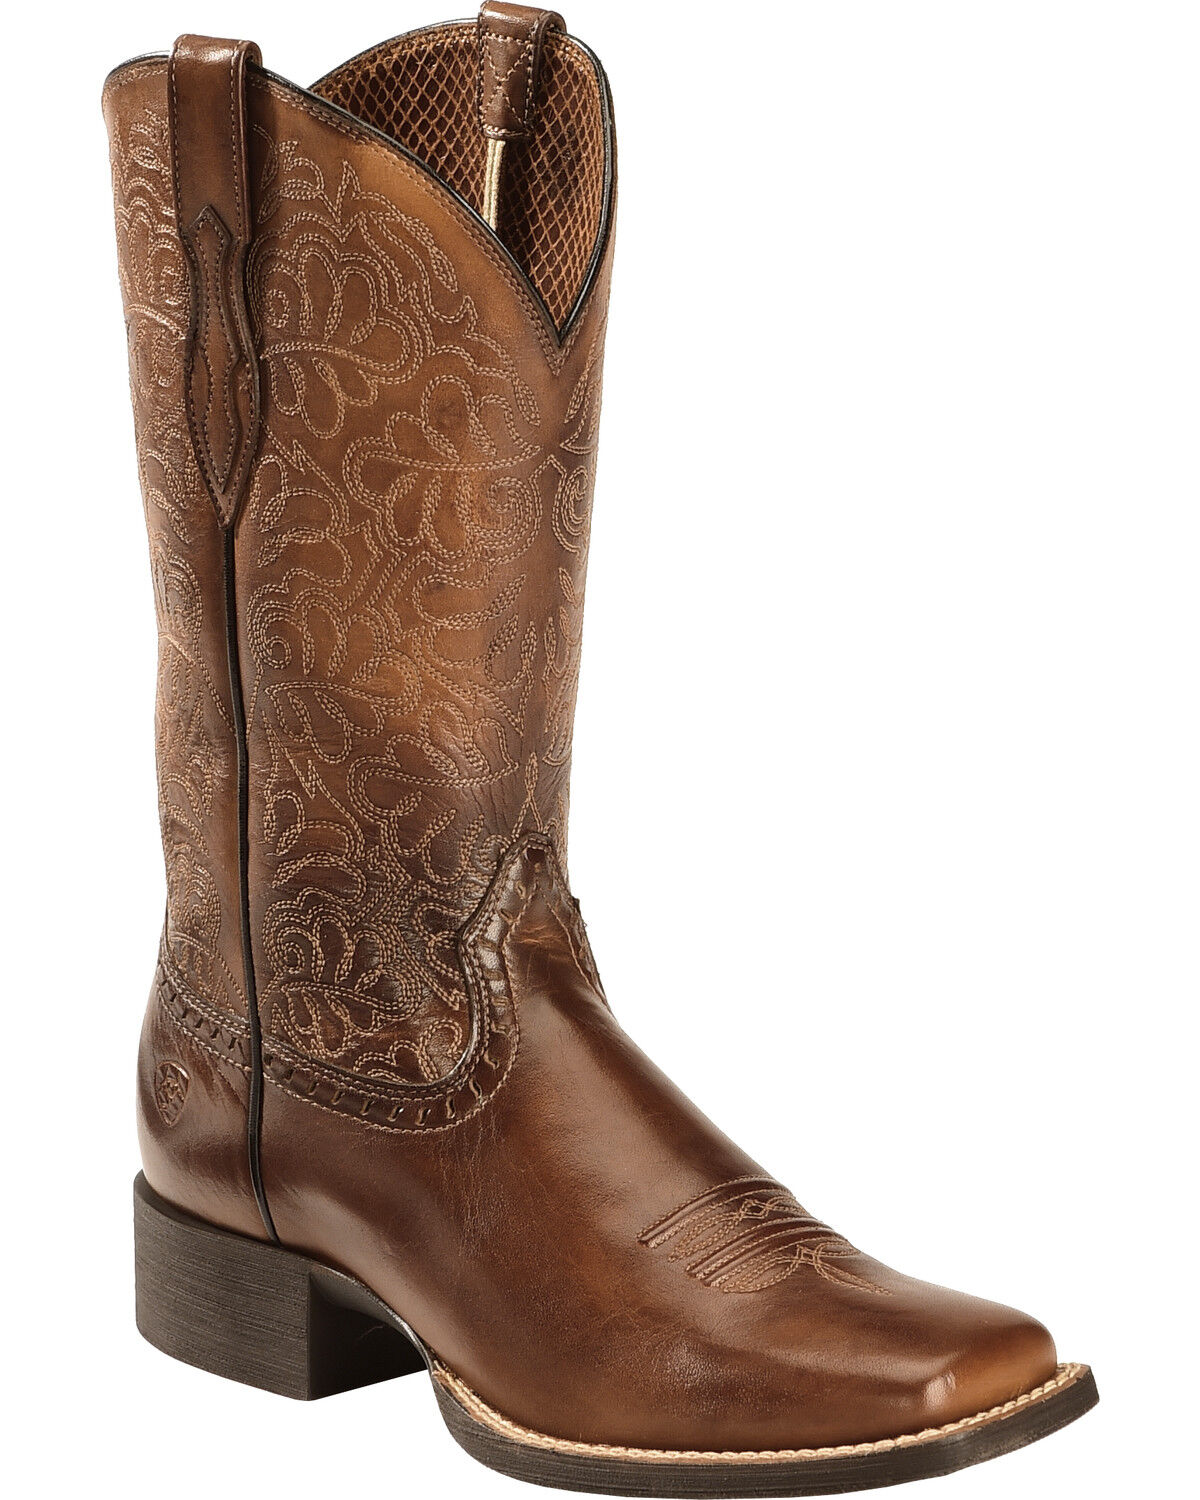 Women's Wide Square Toe Boots - Boot Barn